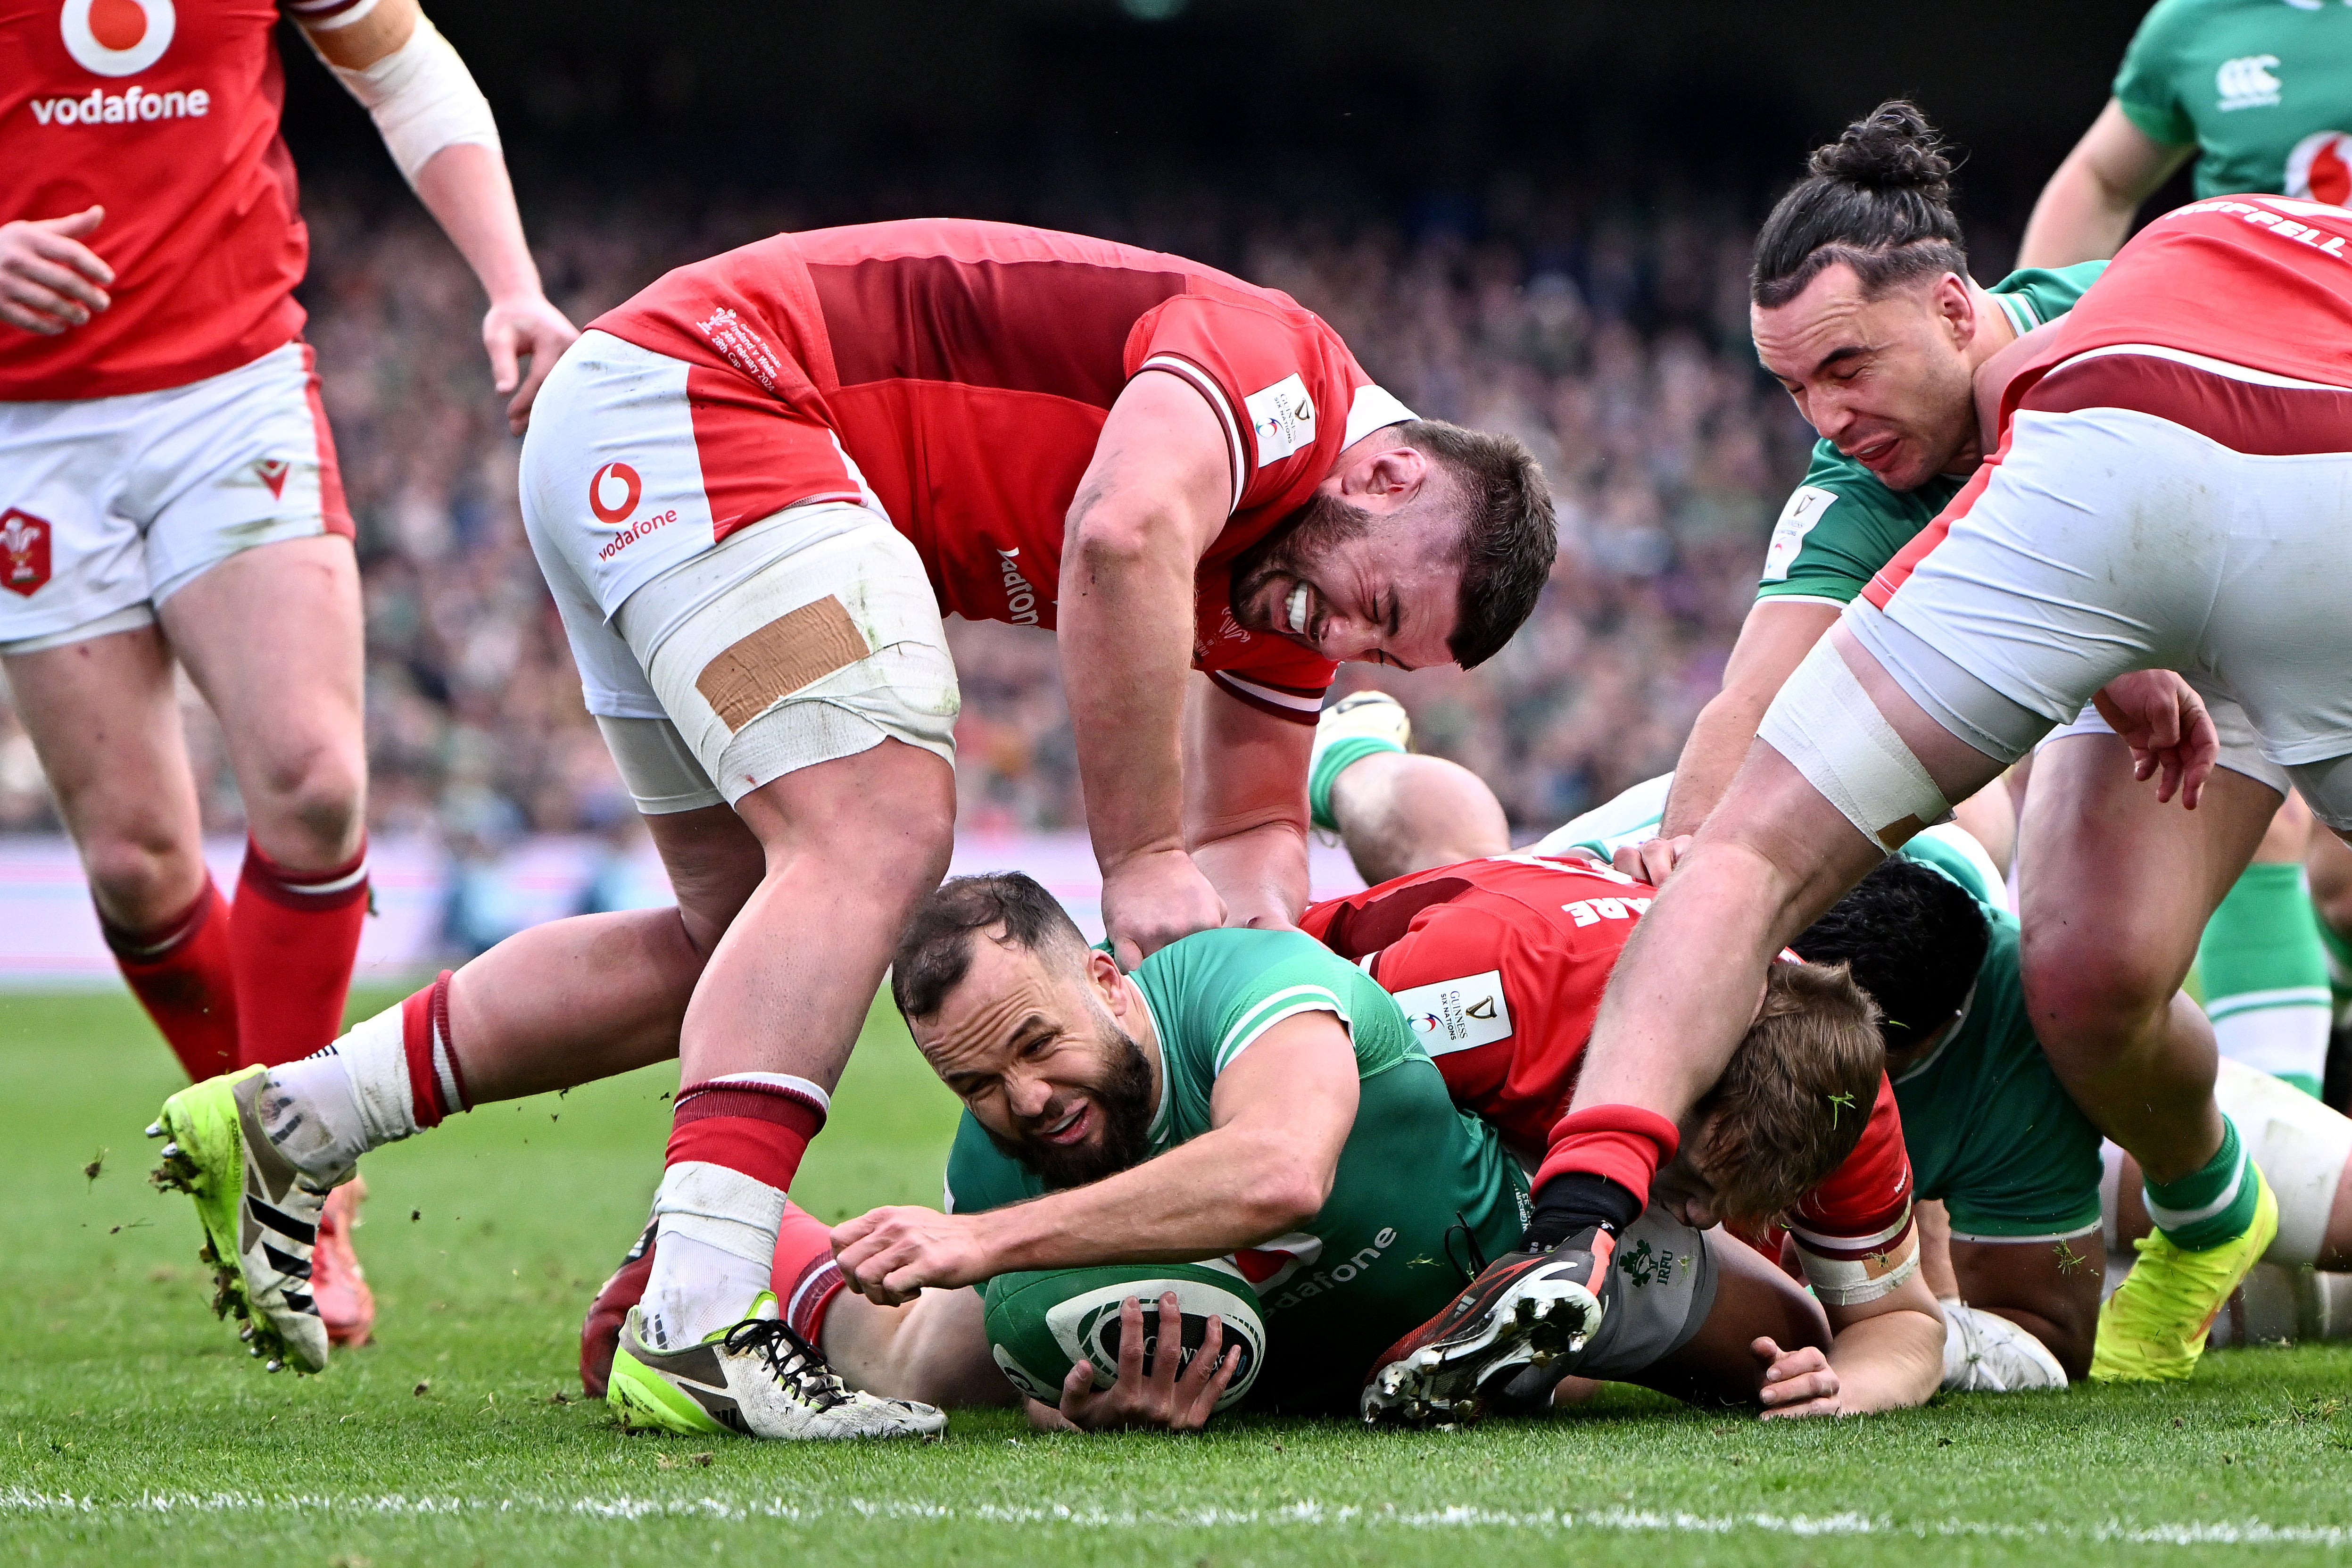 Ireland showed their strength to down Wales